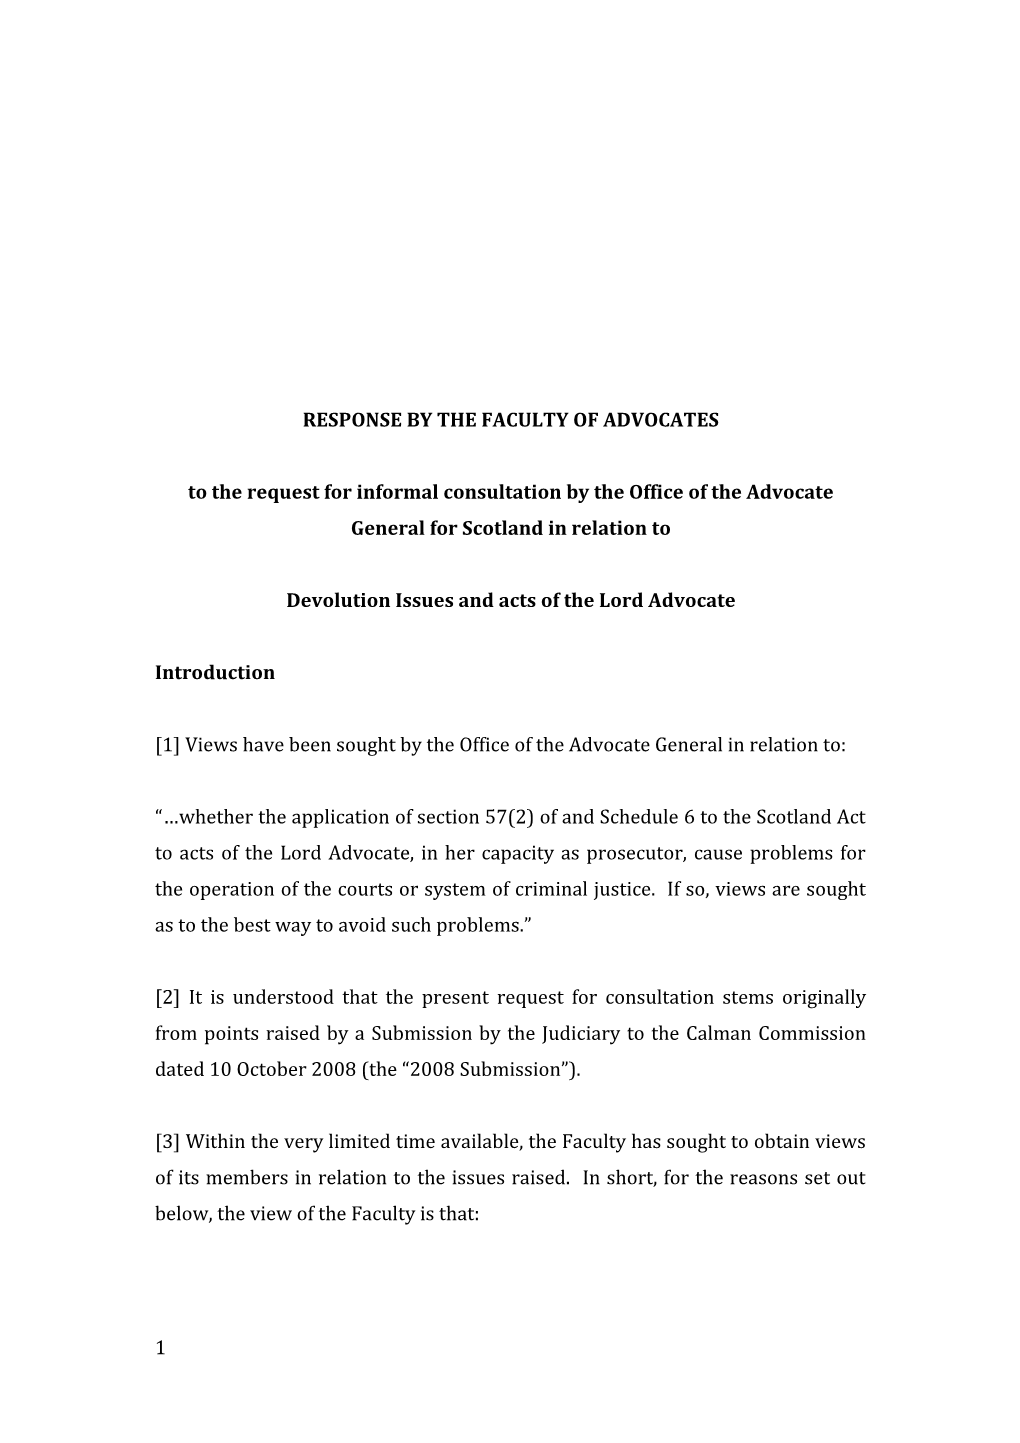 Response by the Faculty of Advocates